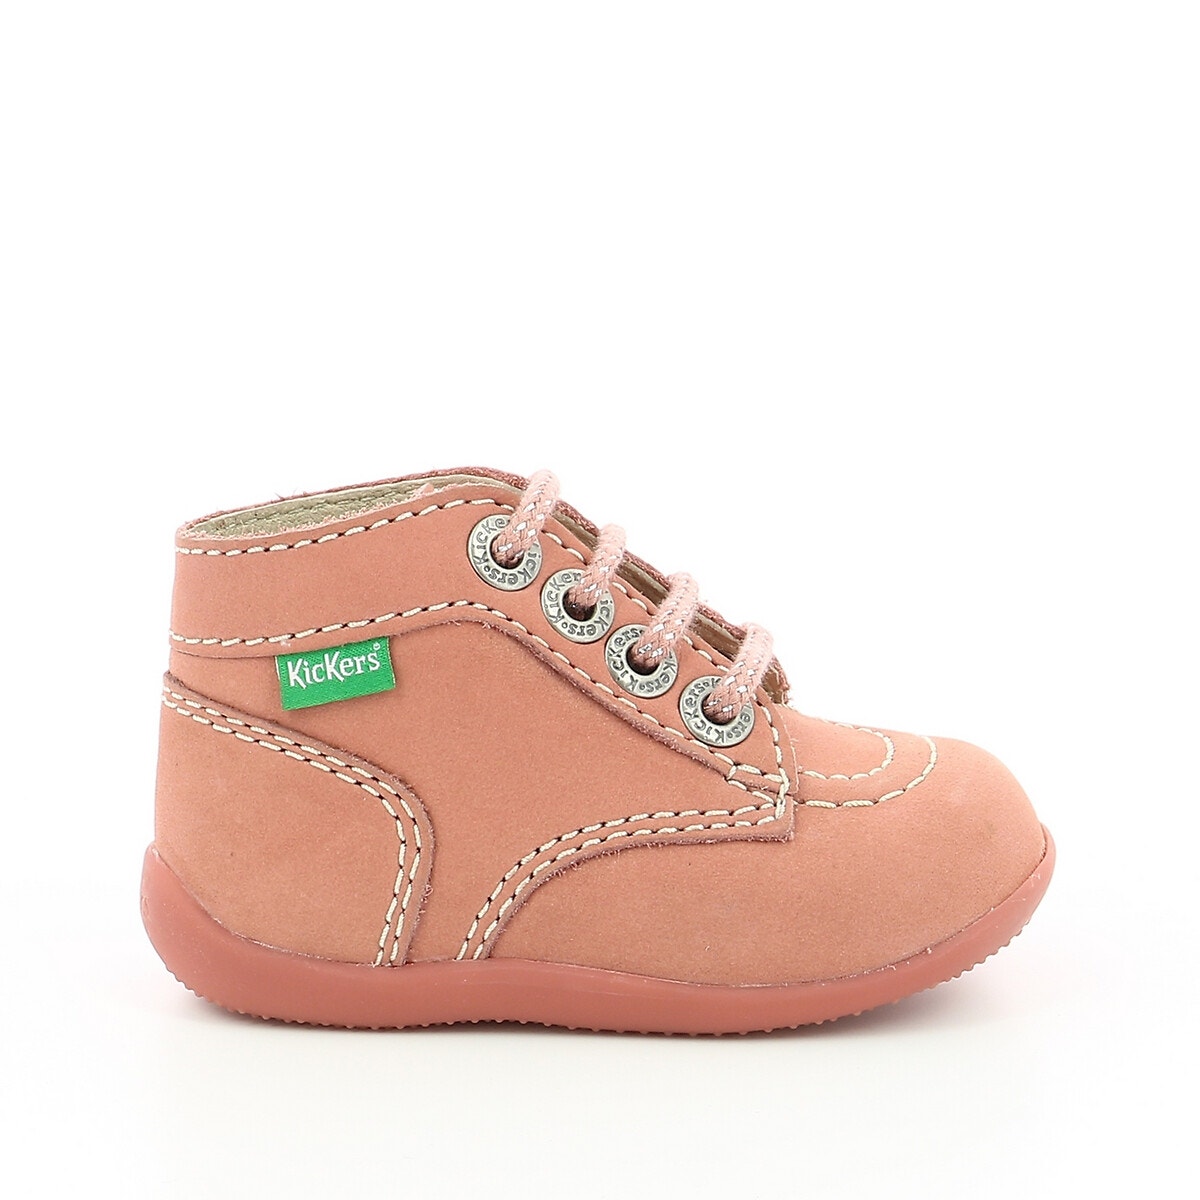 Kids Bonbon Ankle Boots in Suede